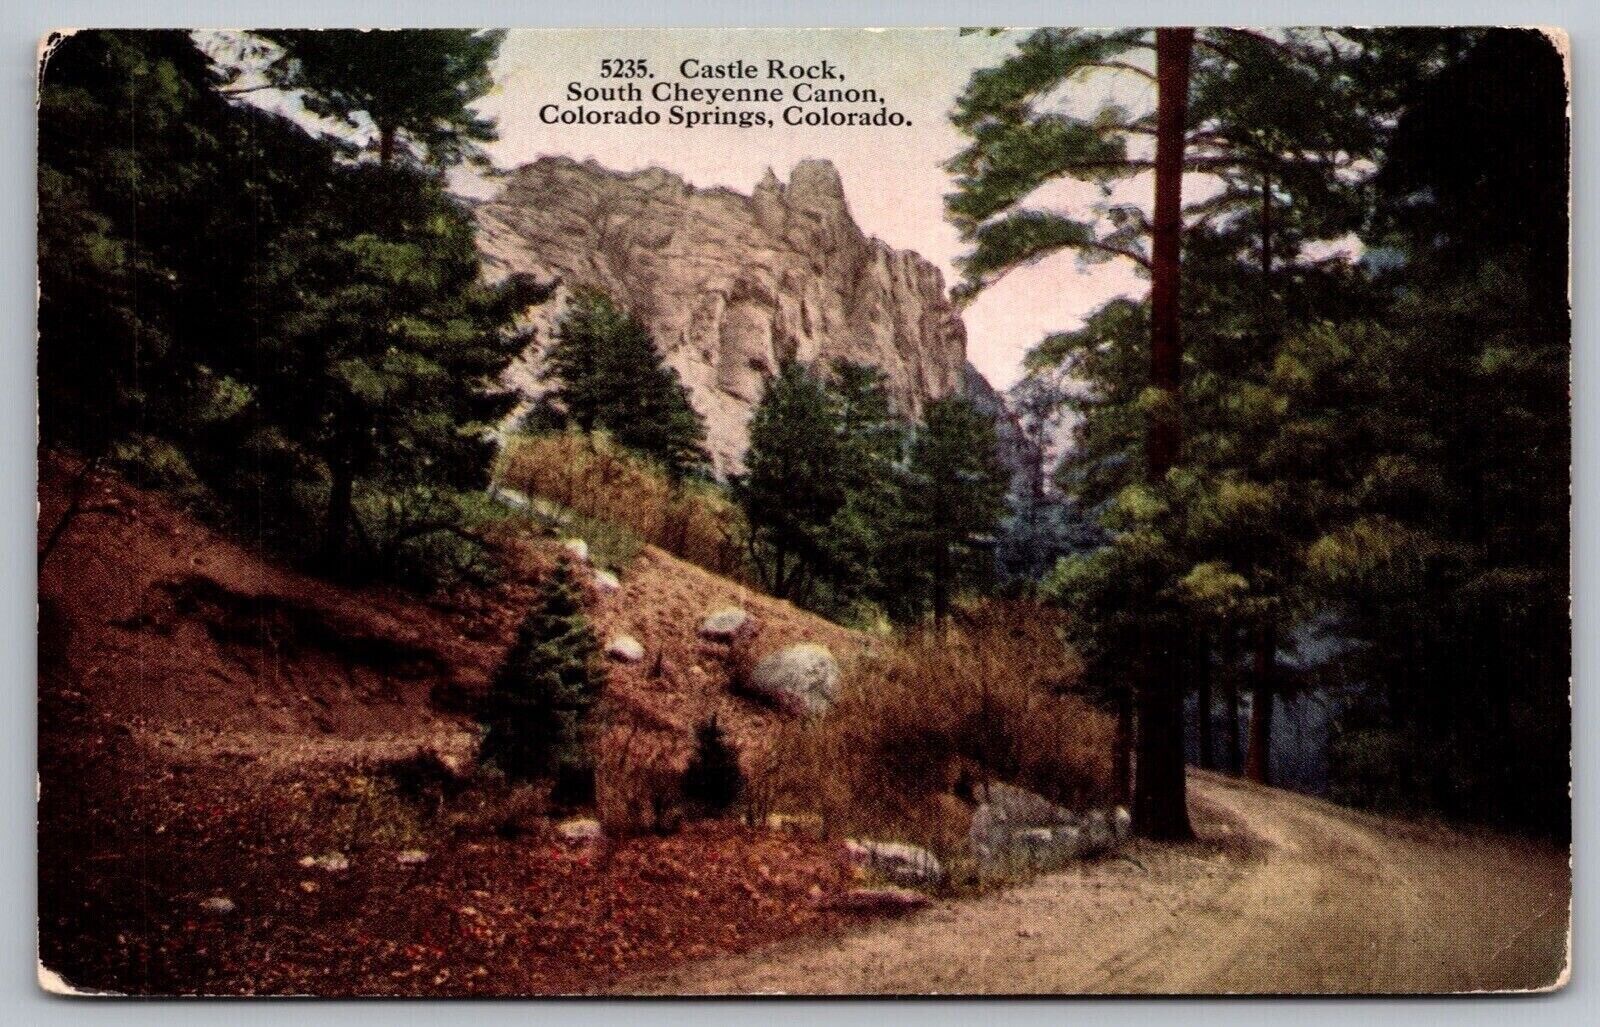 Castle Rock South Cheyenne Canyon Colorado Springs CO Country Road VNG Postcard